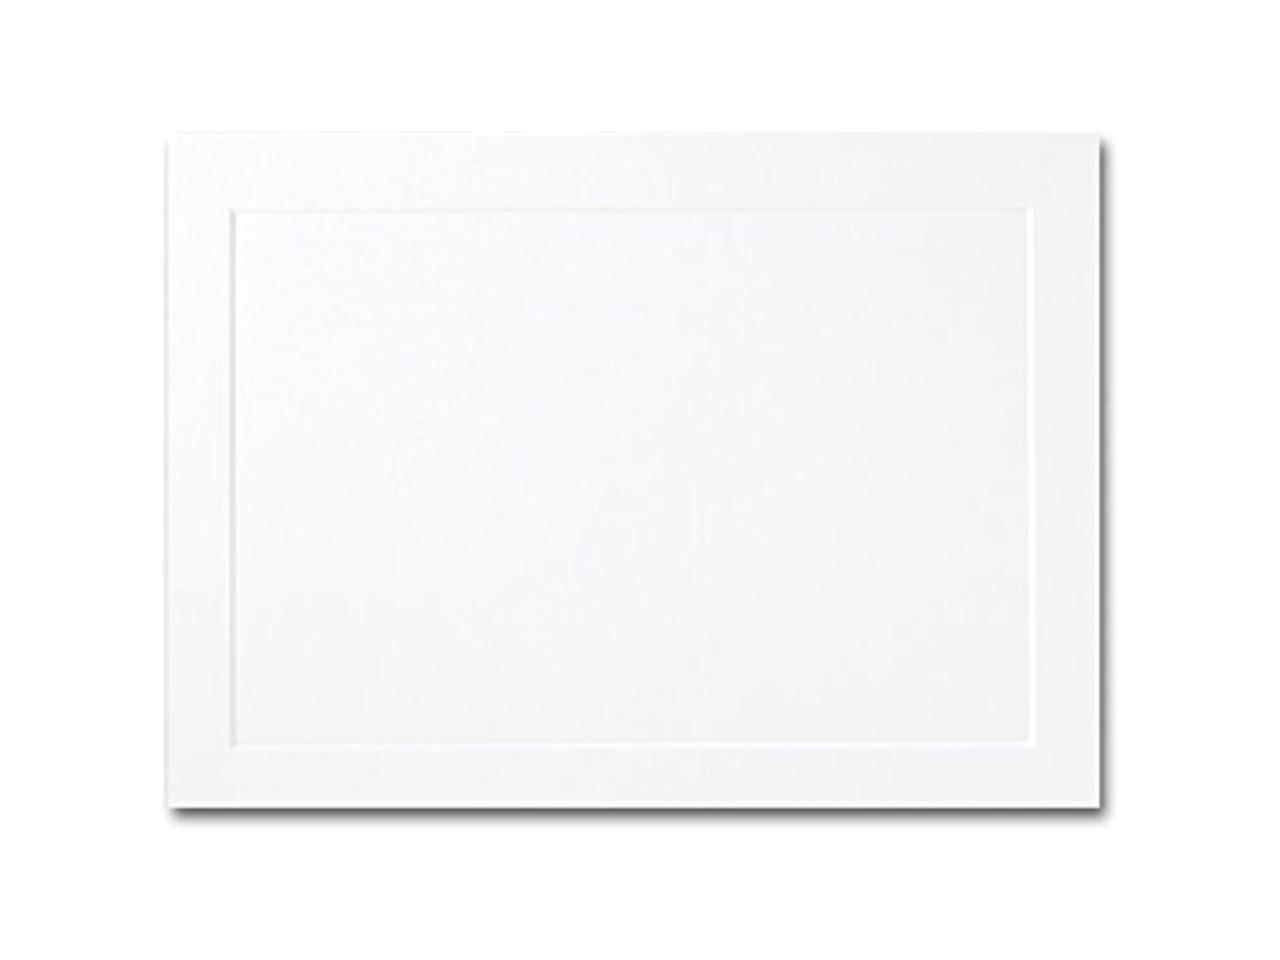 RRAN55FWP Size A2 Fine Impressions 250-Count White Blank Fold-Over Panel Cards For Invitations/Announcements/Responses/Art Cards 4.25 x 5.5